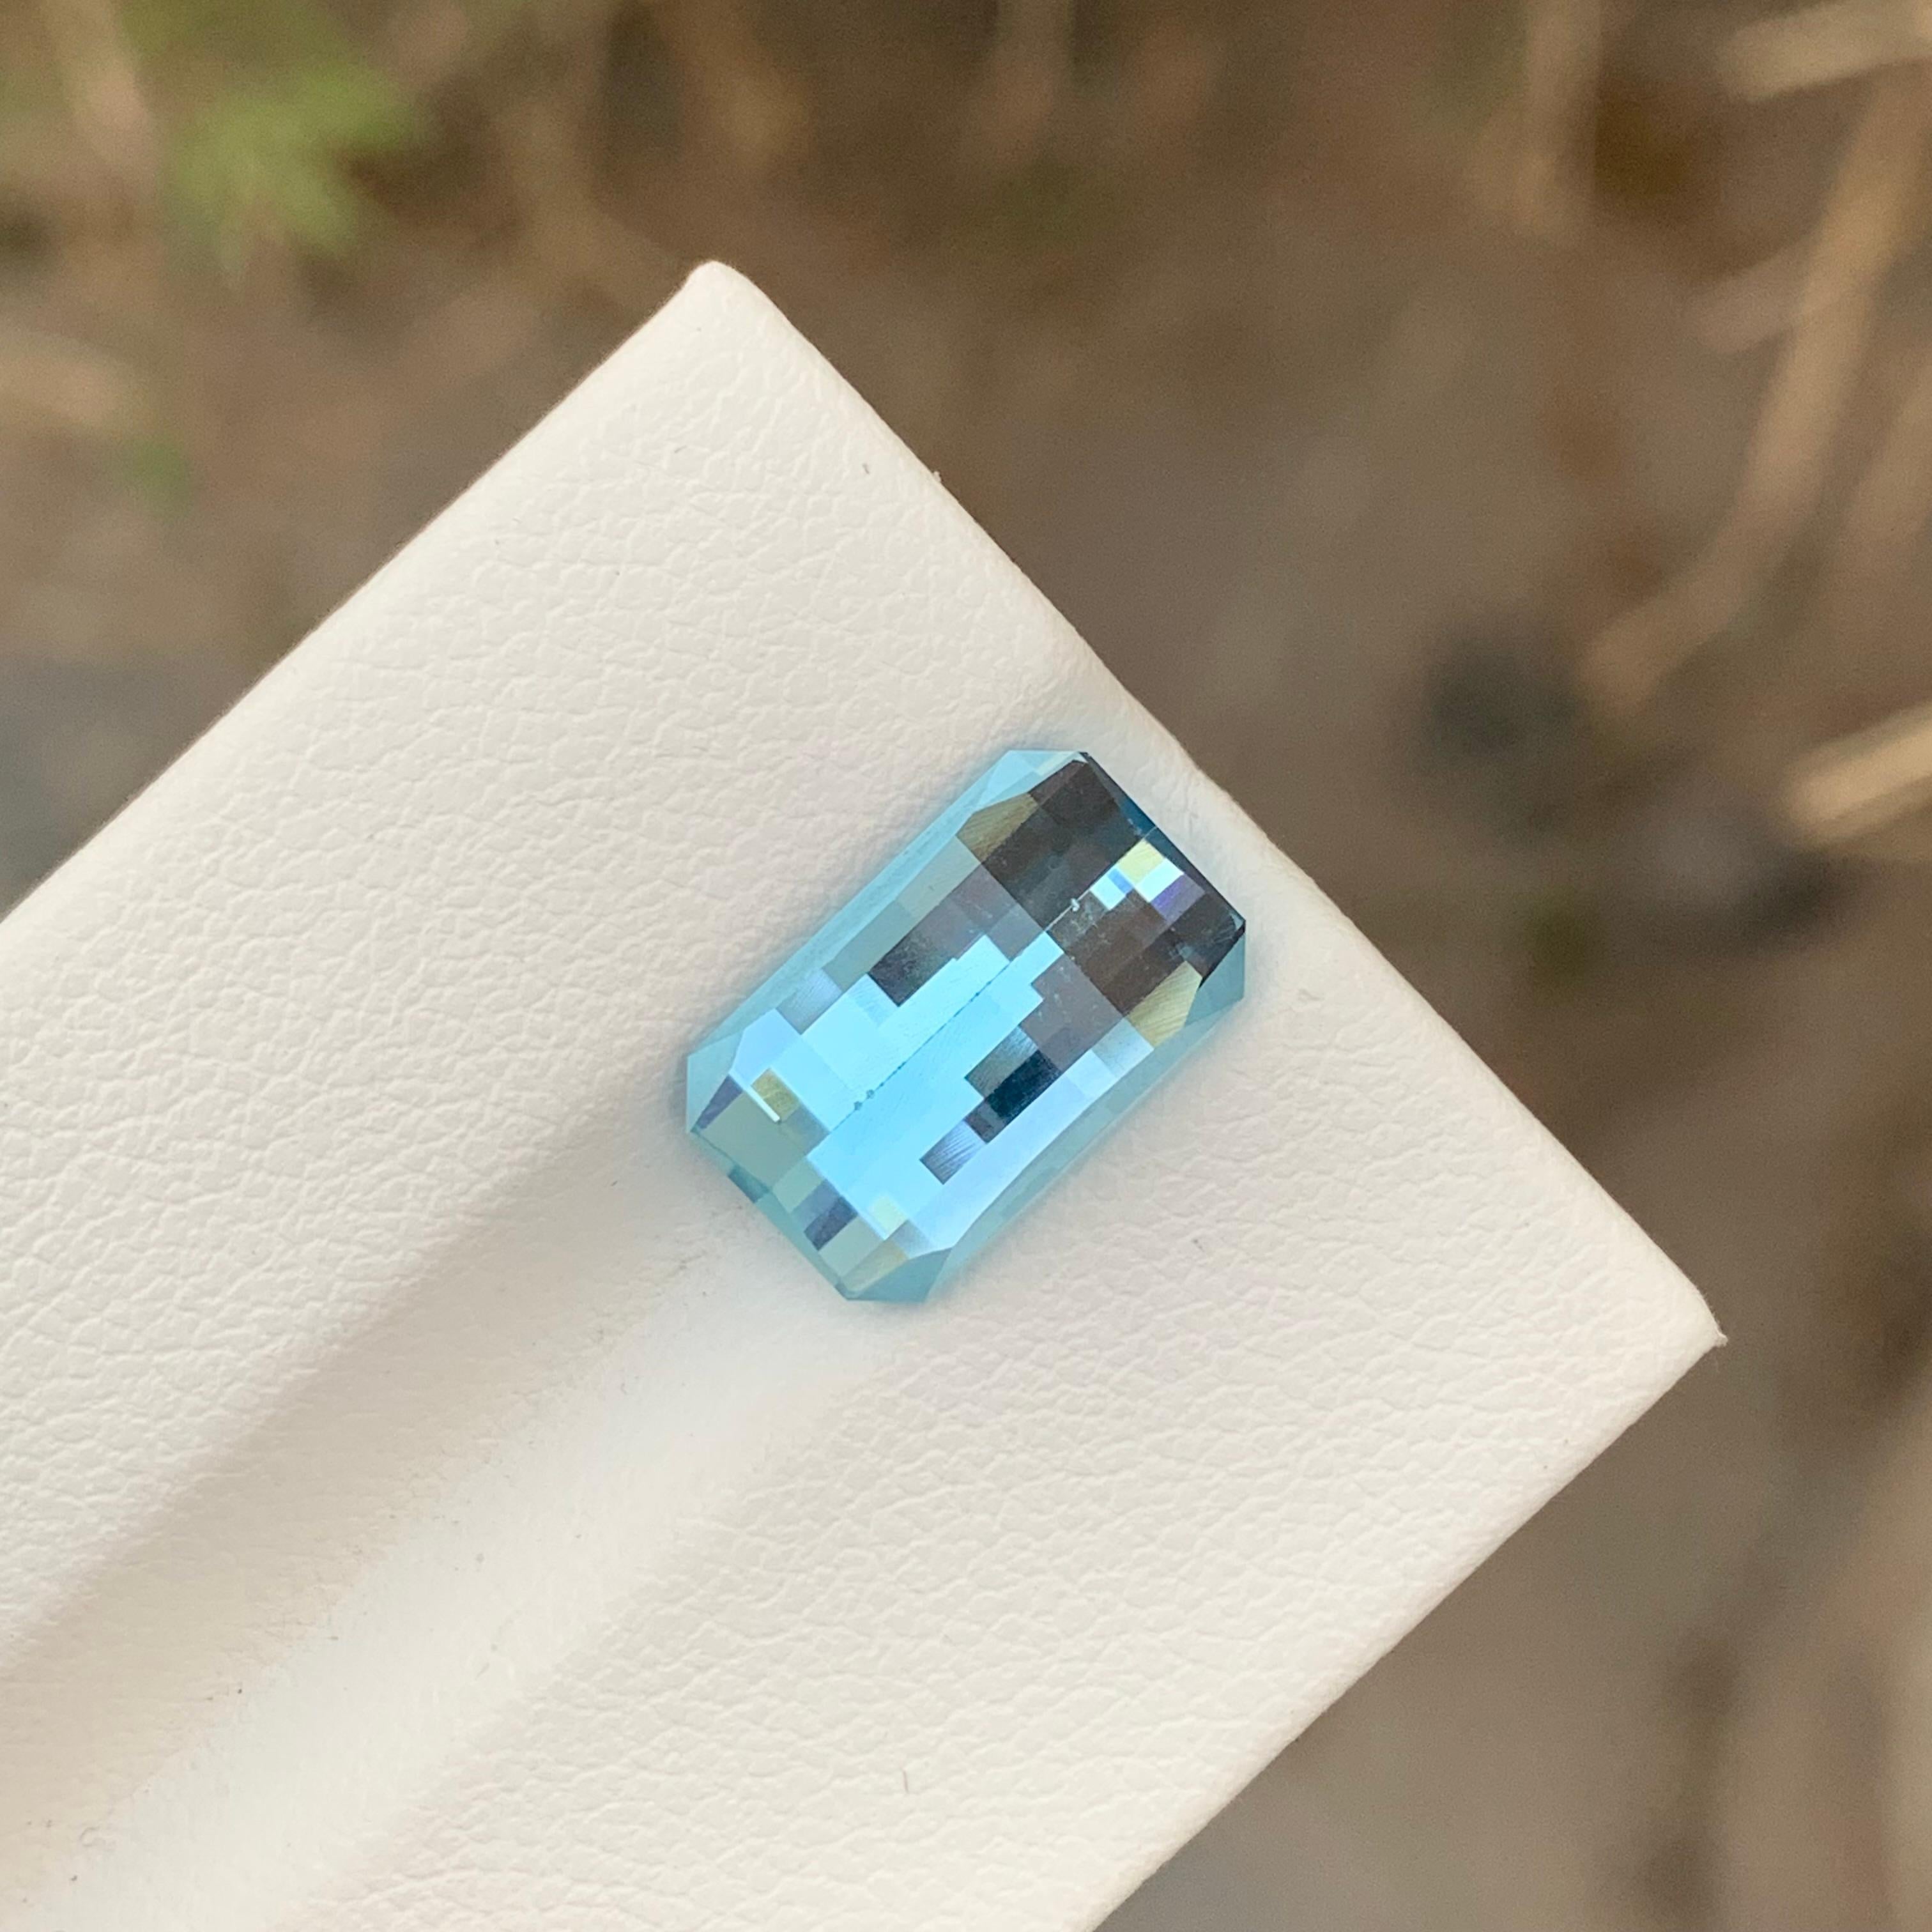 Stunning 6.15 Carats Pixelated Cut Loose Sky Blue Topaz Earth Mine Ring Gem For Sale 1